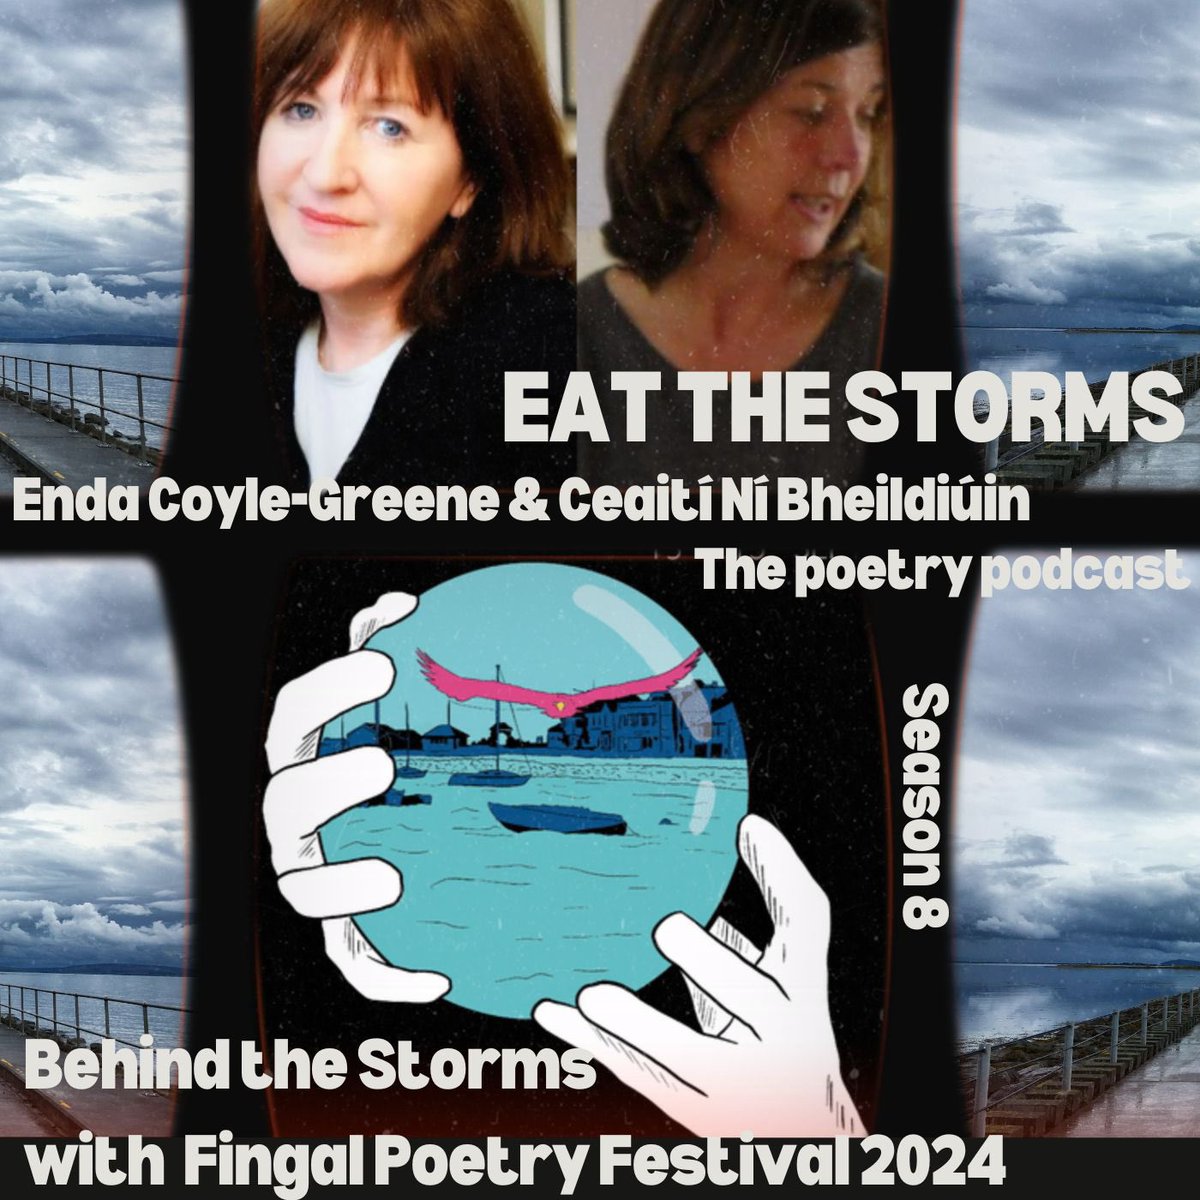 We’re back with a new episode of the #poetry #podcast on Saturday & joining me for our Behind the Storms chat, to talk of their love of poetry & to share details of the @FingalPoetry coming to Skerries in Dublin this Sept is Enda Coyle-Greene & Ceaití Ní Bheildiúin 😉💙